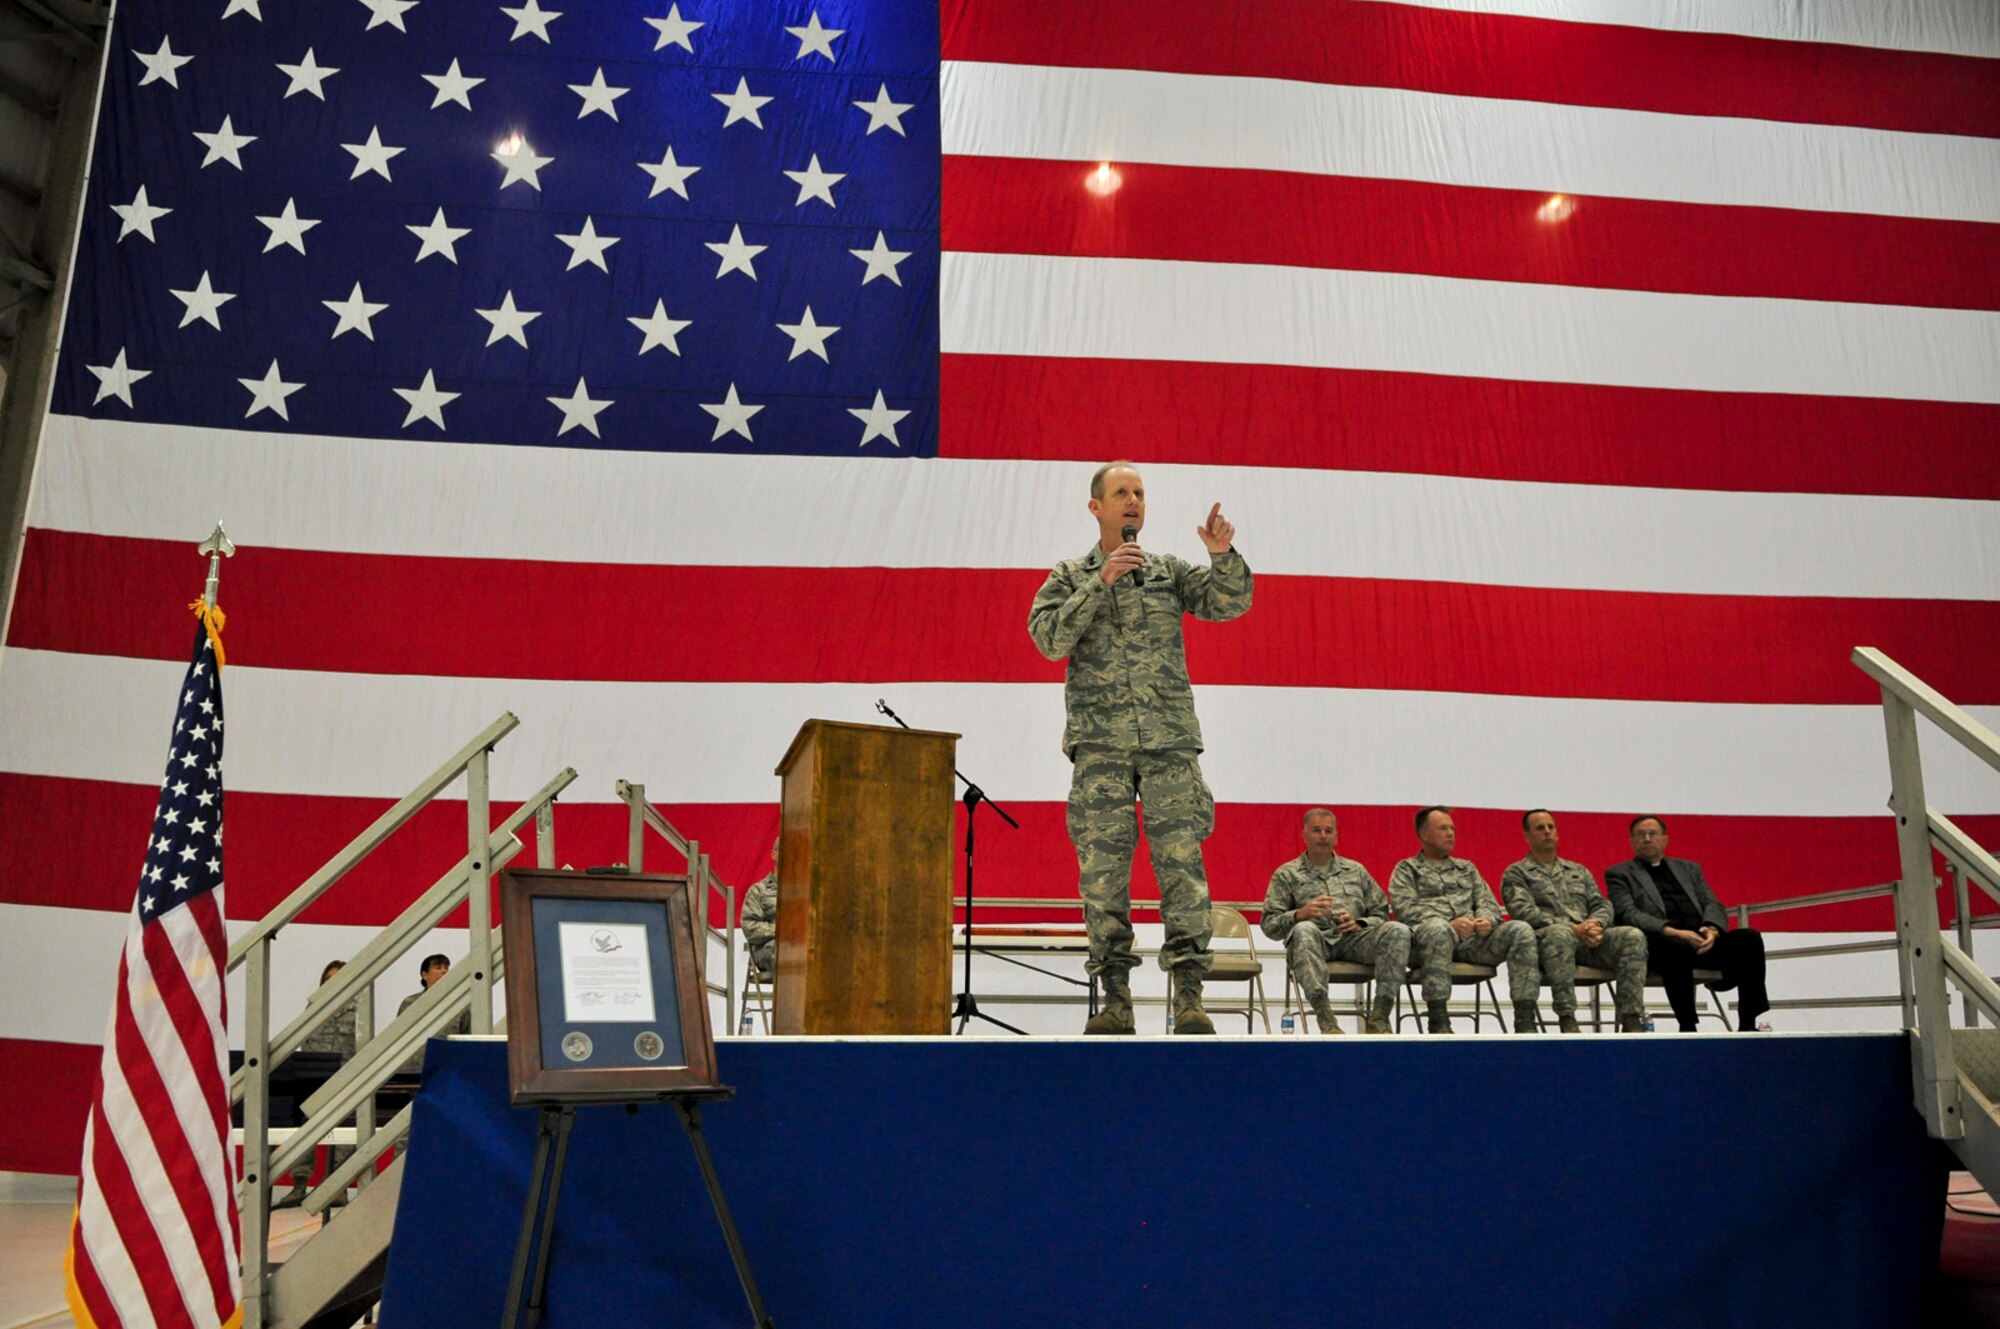 Maj. Gen. Donald P. Dunbar, Wisconsin's adjutant general, offers remarks to more than 100 Airmen during a Hometown Heroes Salute Campaign at the 128th Air Refueling Wing, Milwaukee, on Sunday, December 4, 2011.  Gen. Dunbar told the gathered crowd of locally stationed Airmen, family members, and recipient Airmen of the 128th Air Refueling Wing that "the greatest Air Force on the planet cannot do what it does without the Air National Guard."  The Hometown Heroes Salute Campaign is an Air National Guard event that recognizes Airmen who have deployed overseas for more than 30 days.  Air National Guard photo by Tech. Sgt. Tom Sobczyk.